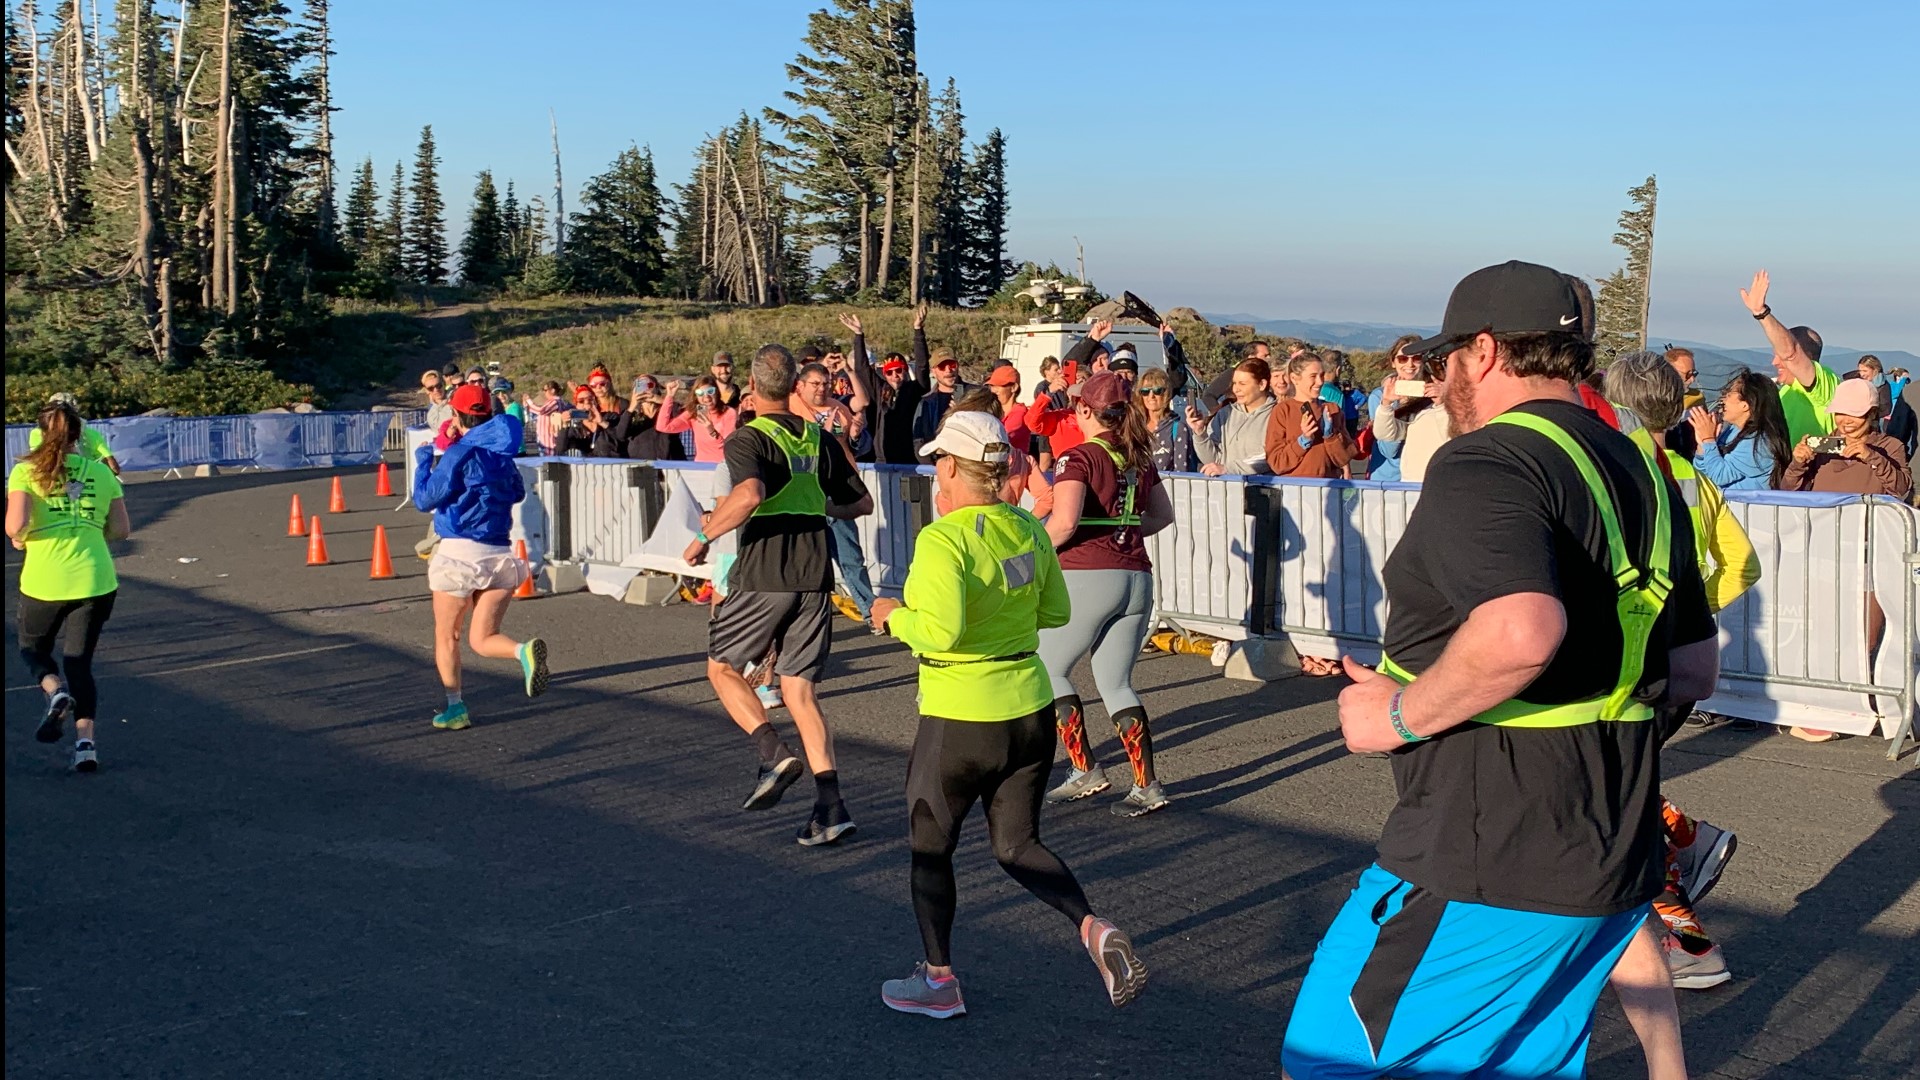 Thousands of runners took off from Timberline Lodge at the start of the Hood to Coast Relay on Friday morning. KGW's Drew Carney was there to wish them well.